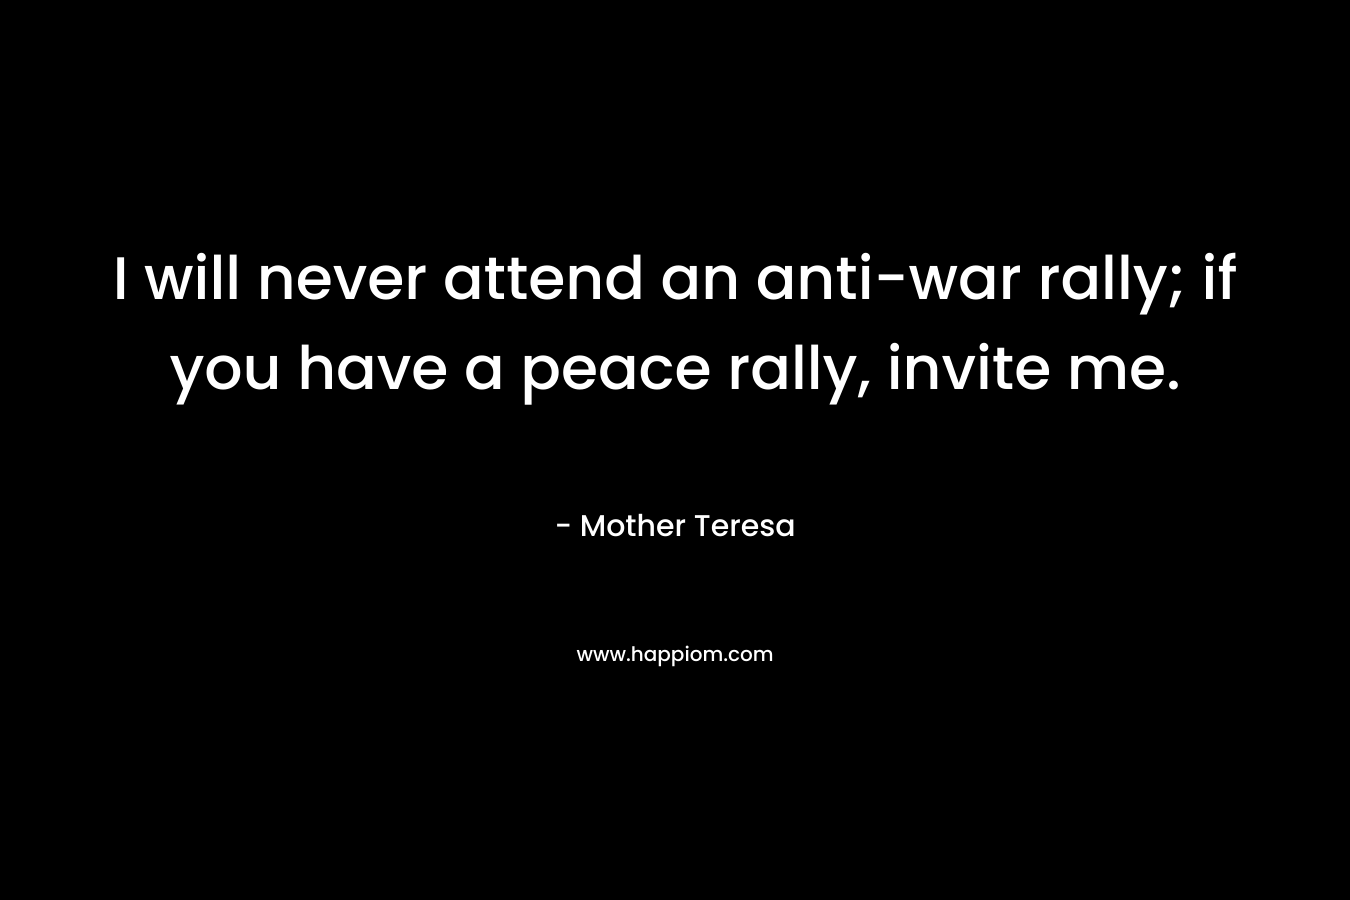 I will never attend an anti-war rally; if you have a peace rally, invite me. – Mother Teresa